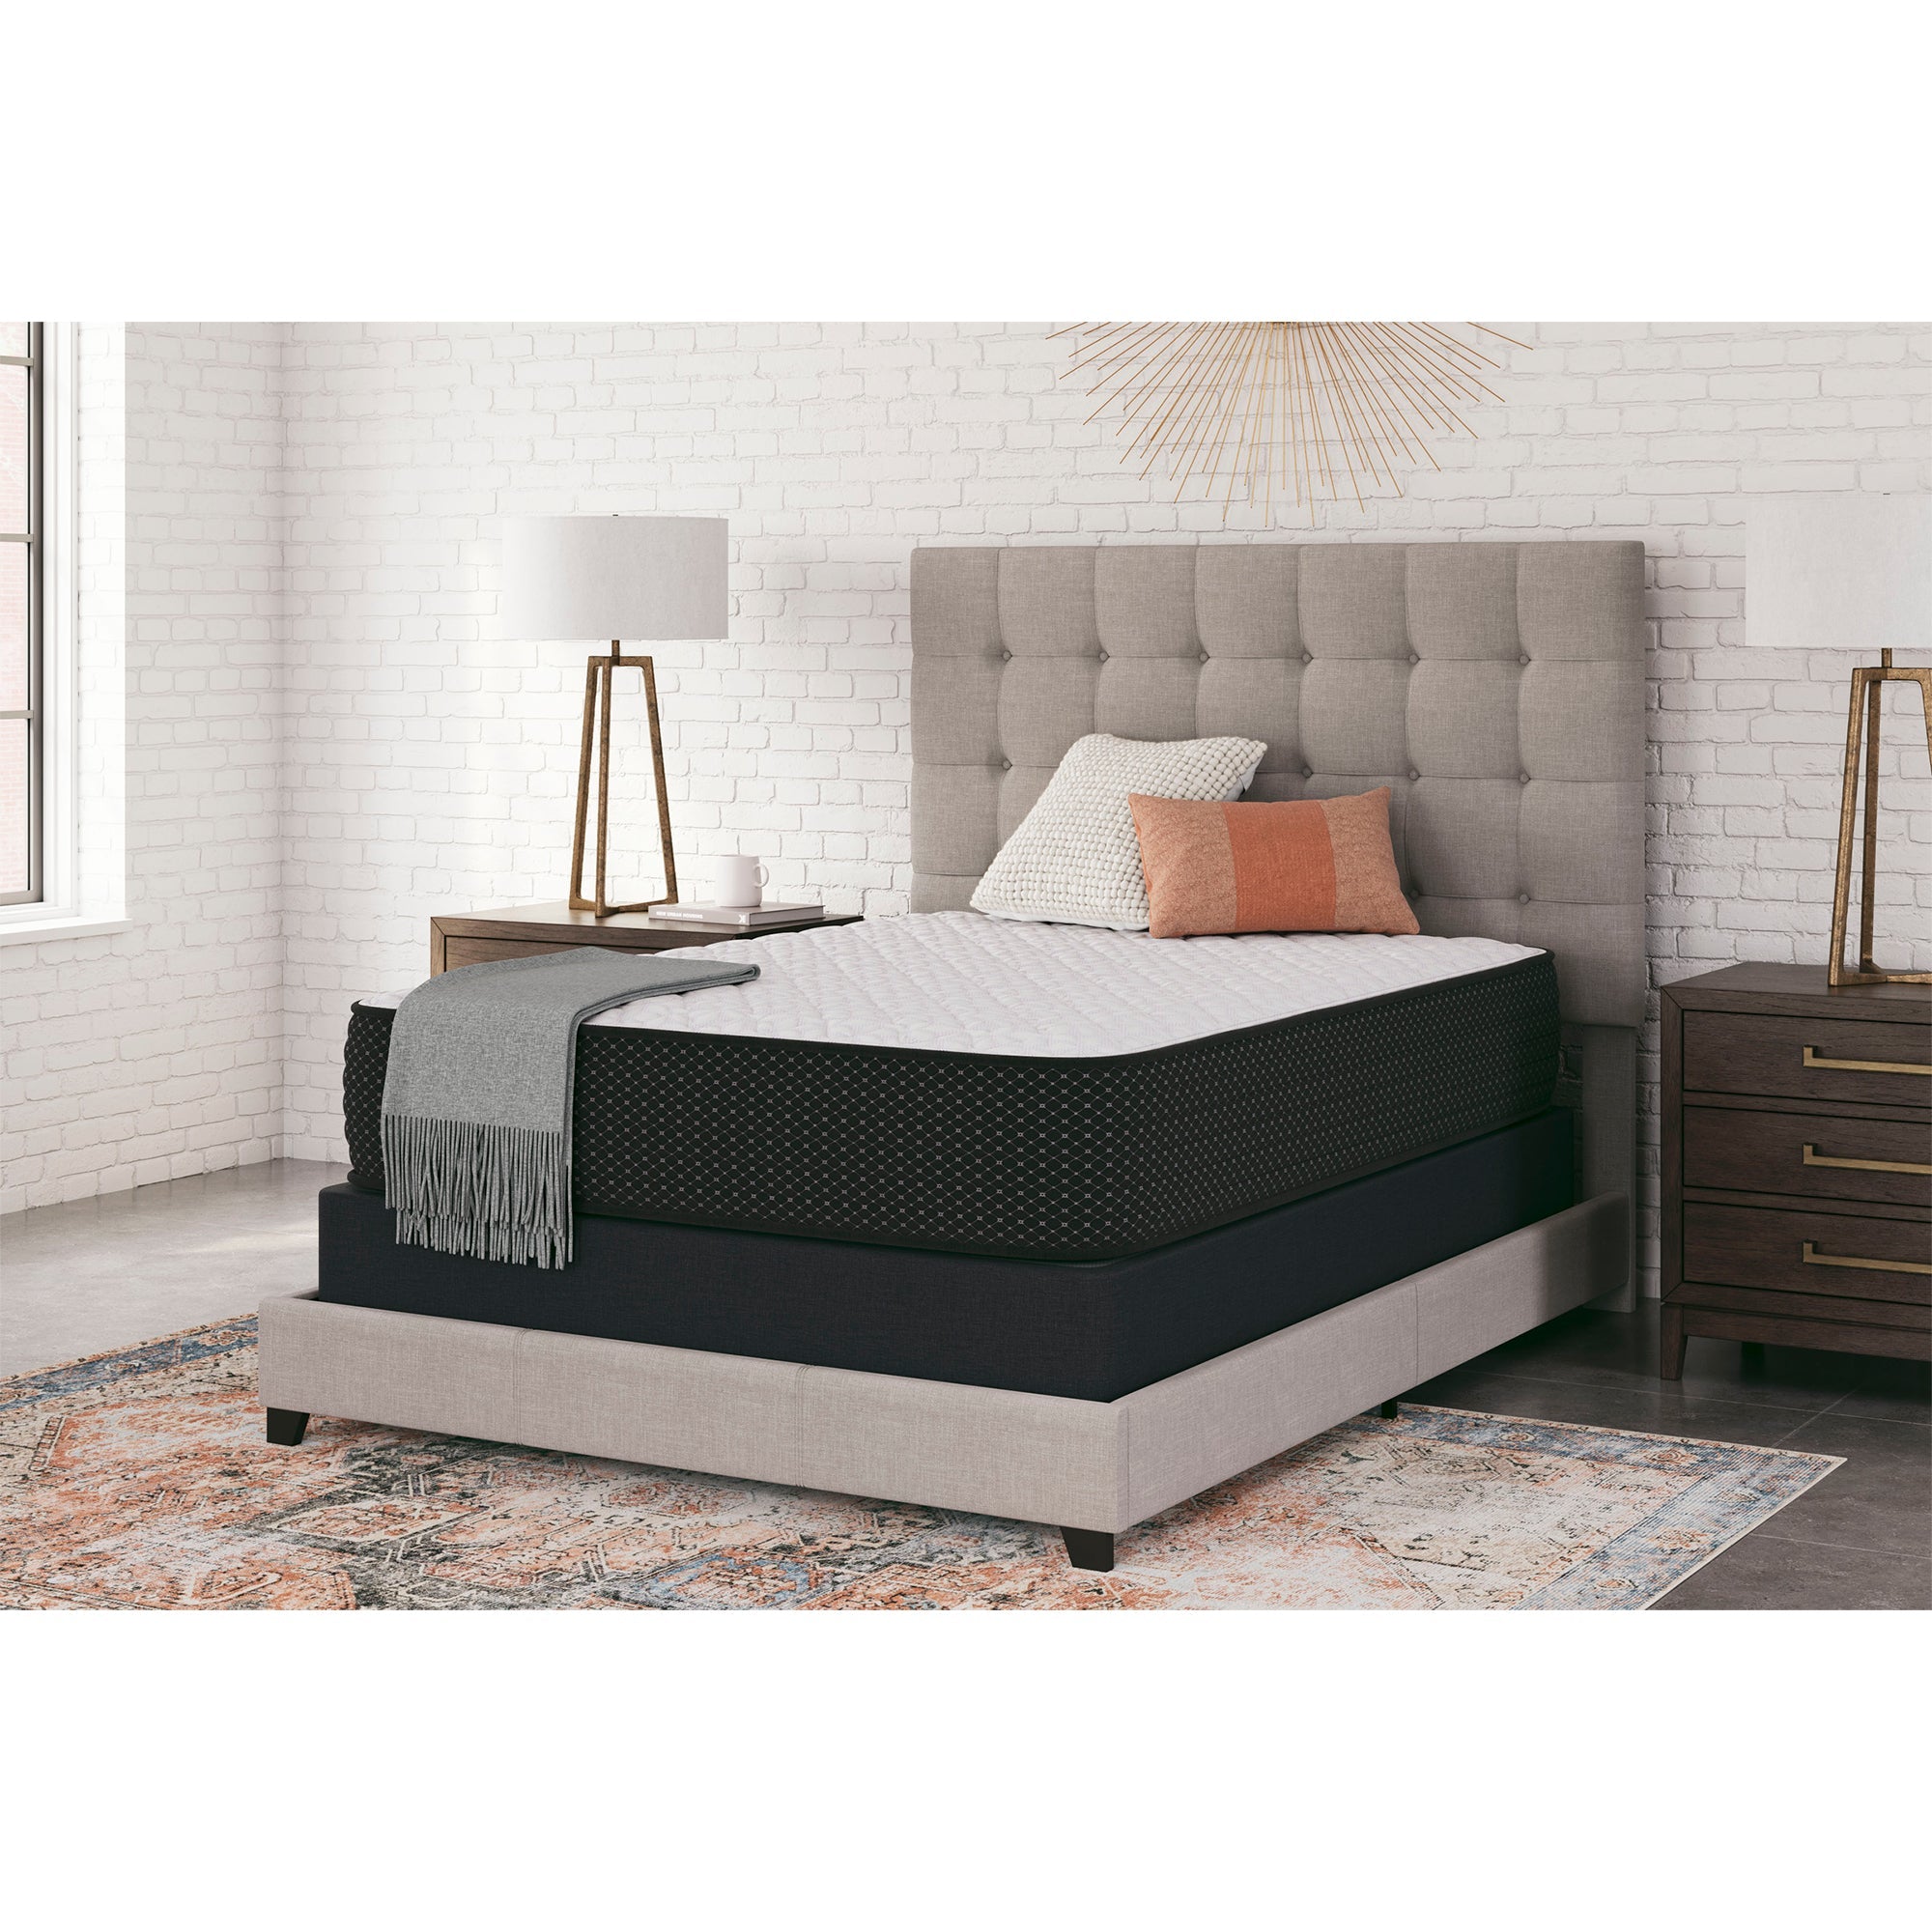 12 Inch Limited Edition King Firm Mattress